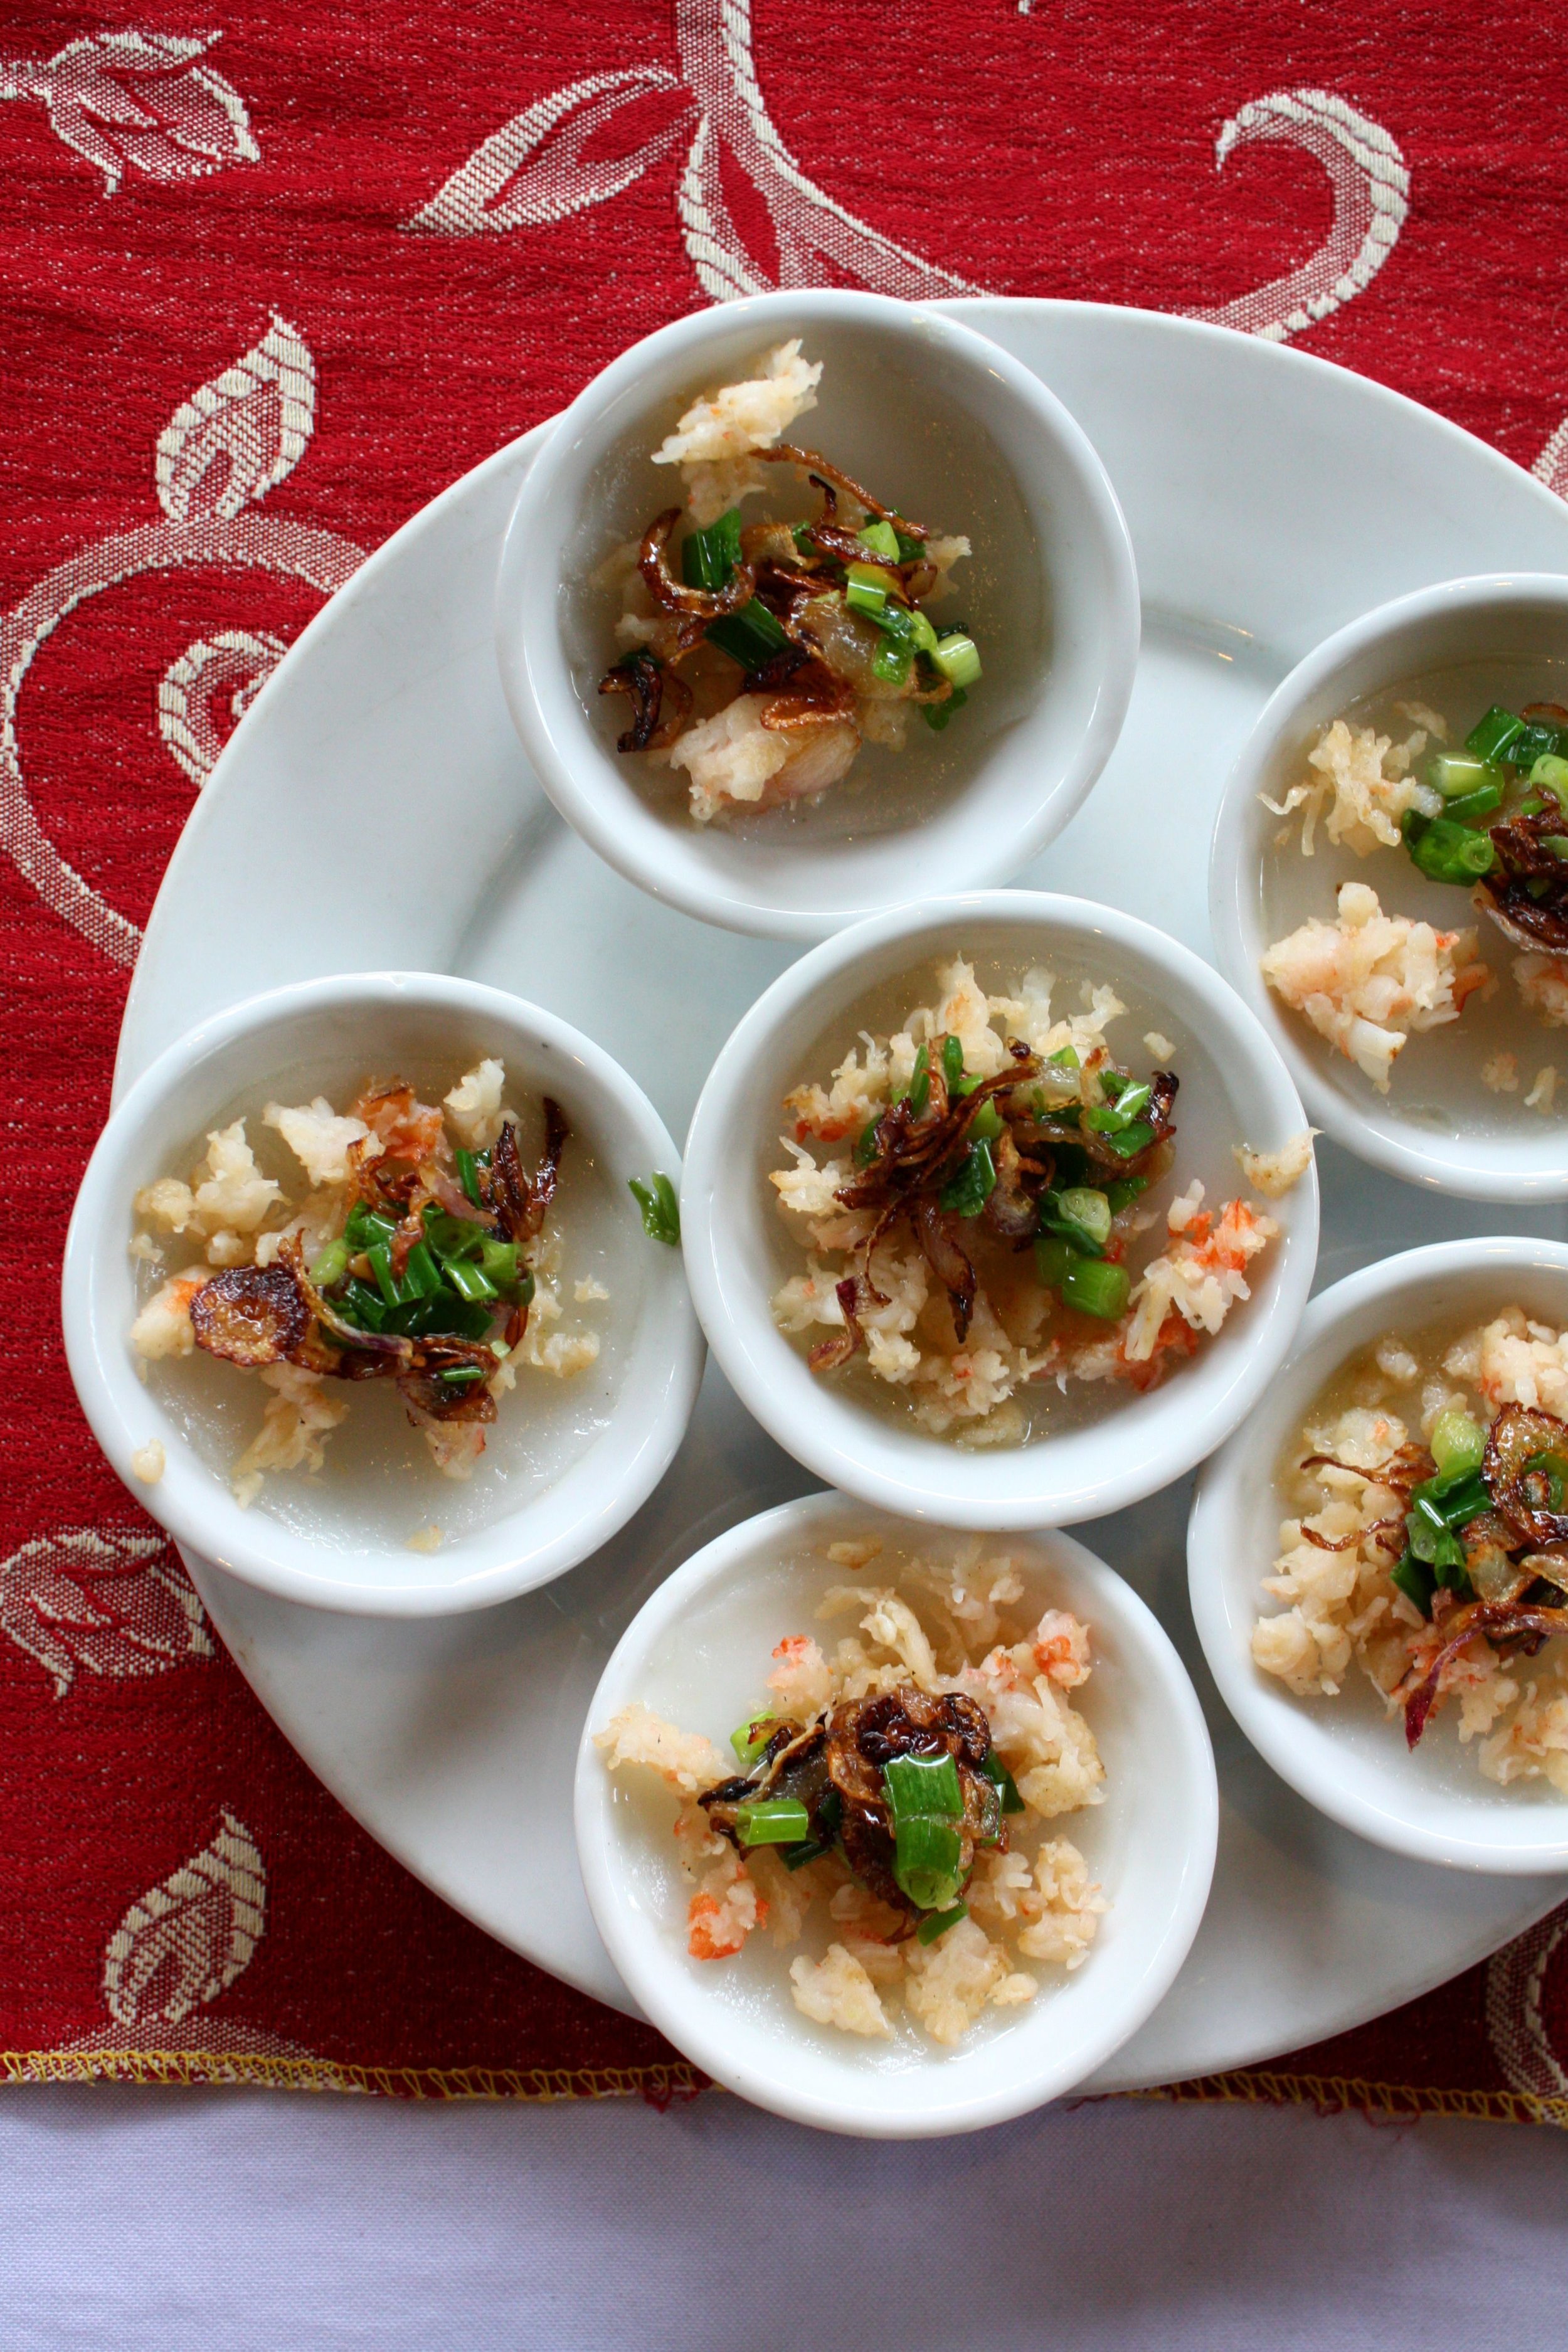  Freshly steamed Banh Beo (steamed rice flour "pancakes") topped with sautéed shrimp, crispy shallots and green onions. 